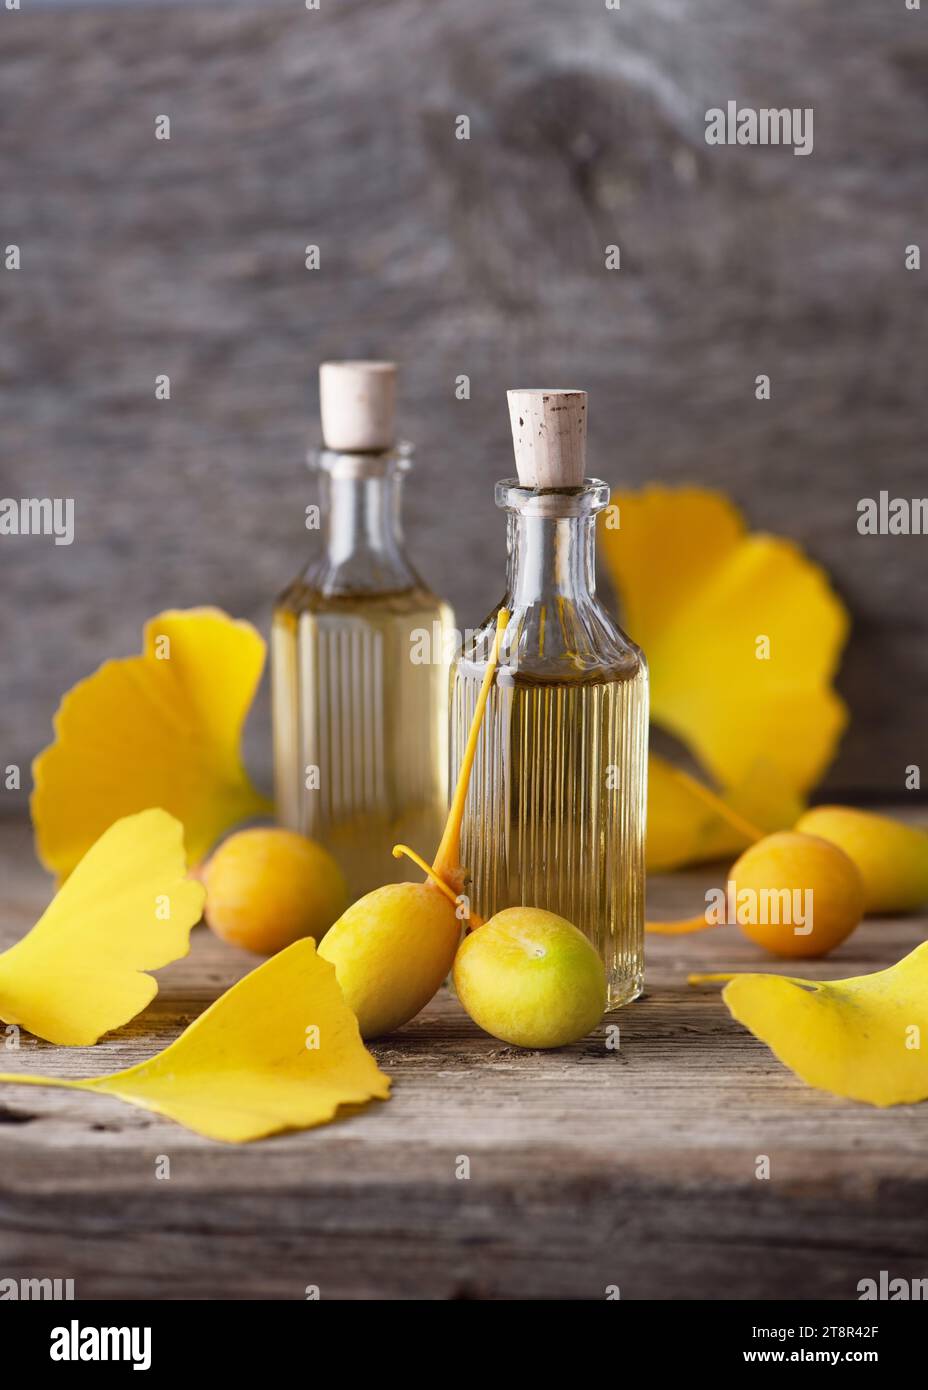 Two small bottles with Extract or oil. Healing properties of seeds and leaves of ginkgo biloba in herbal medicine. Copy space. Stock Photo